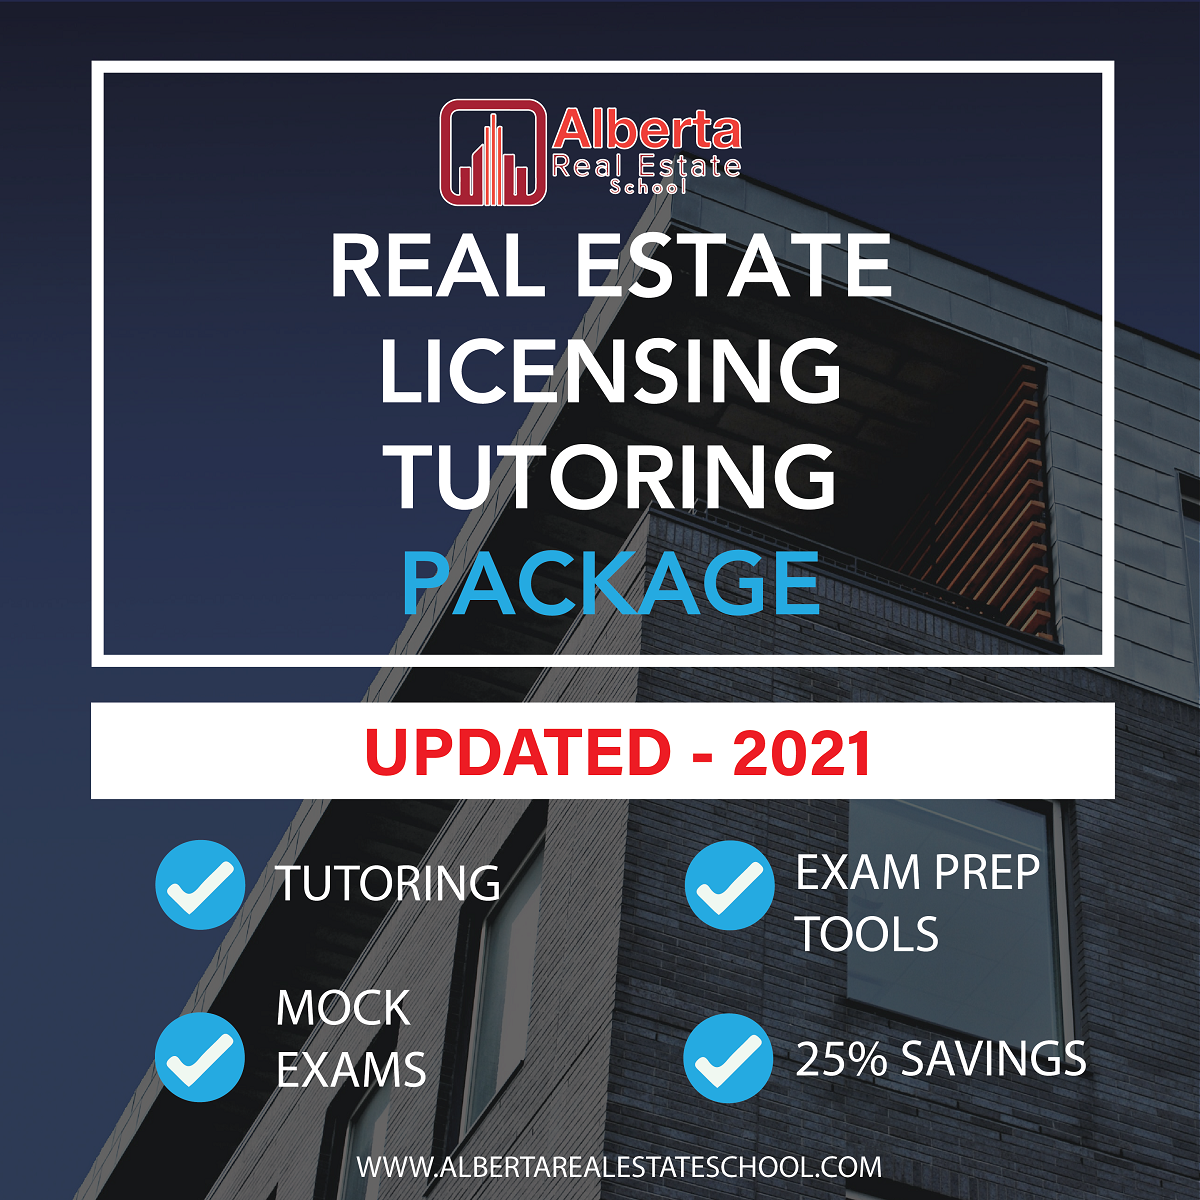 A training package offering Fundamentals of Real Estate - Tutoring Package in Alberta.